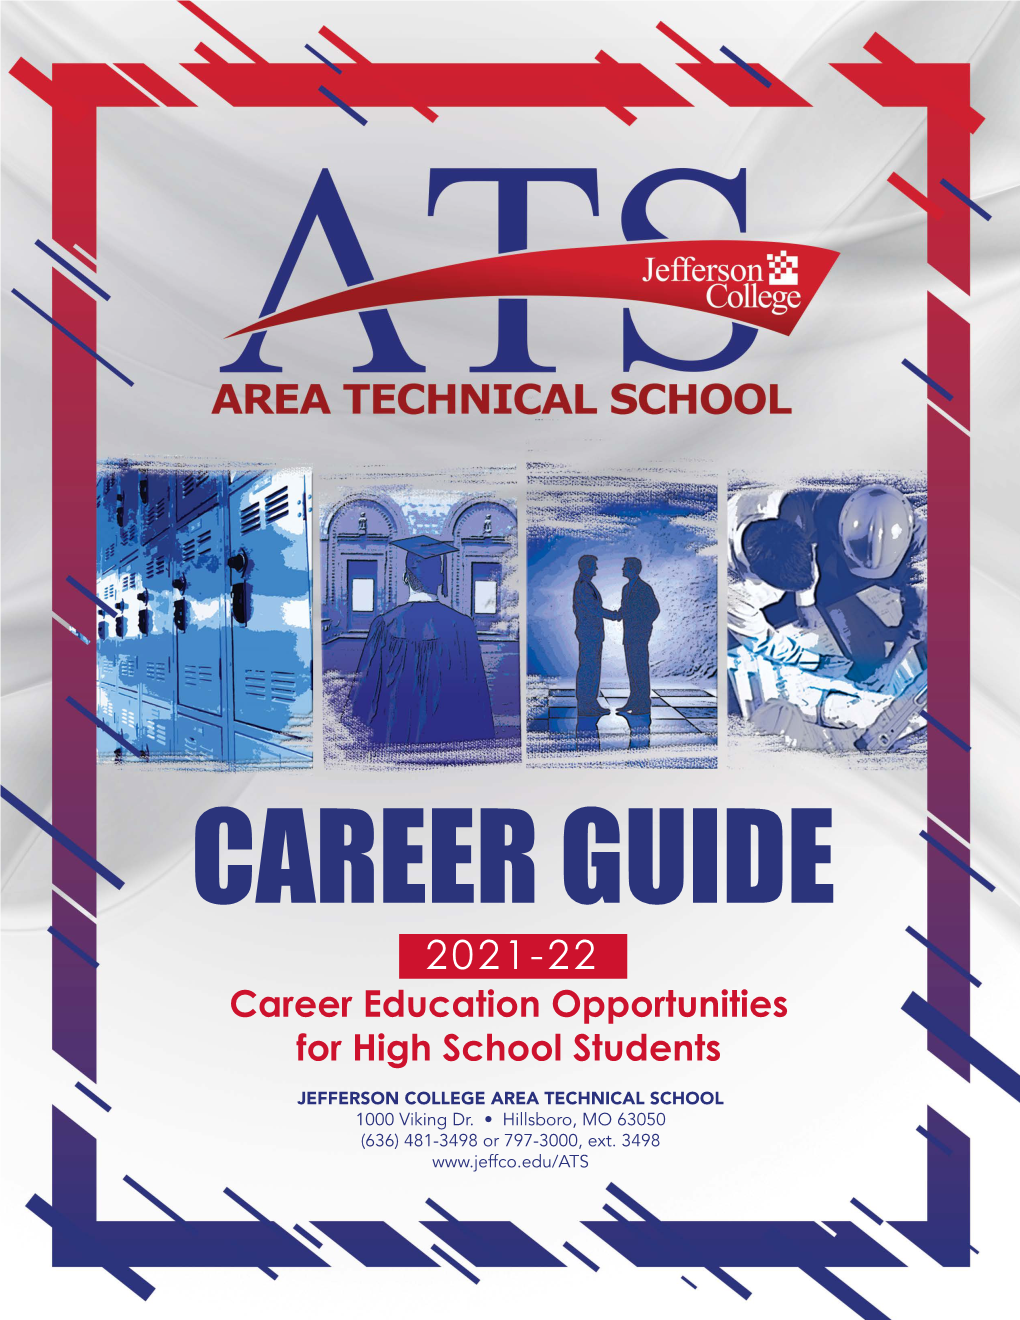 Career Education Opportunities for High School Students